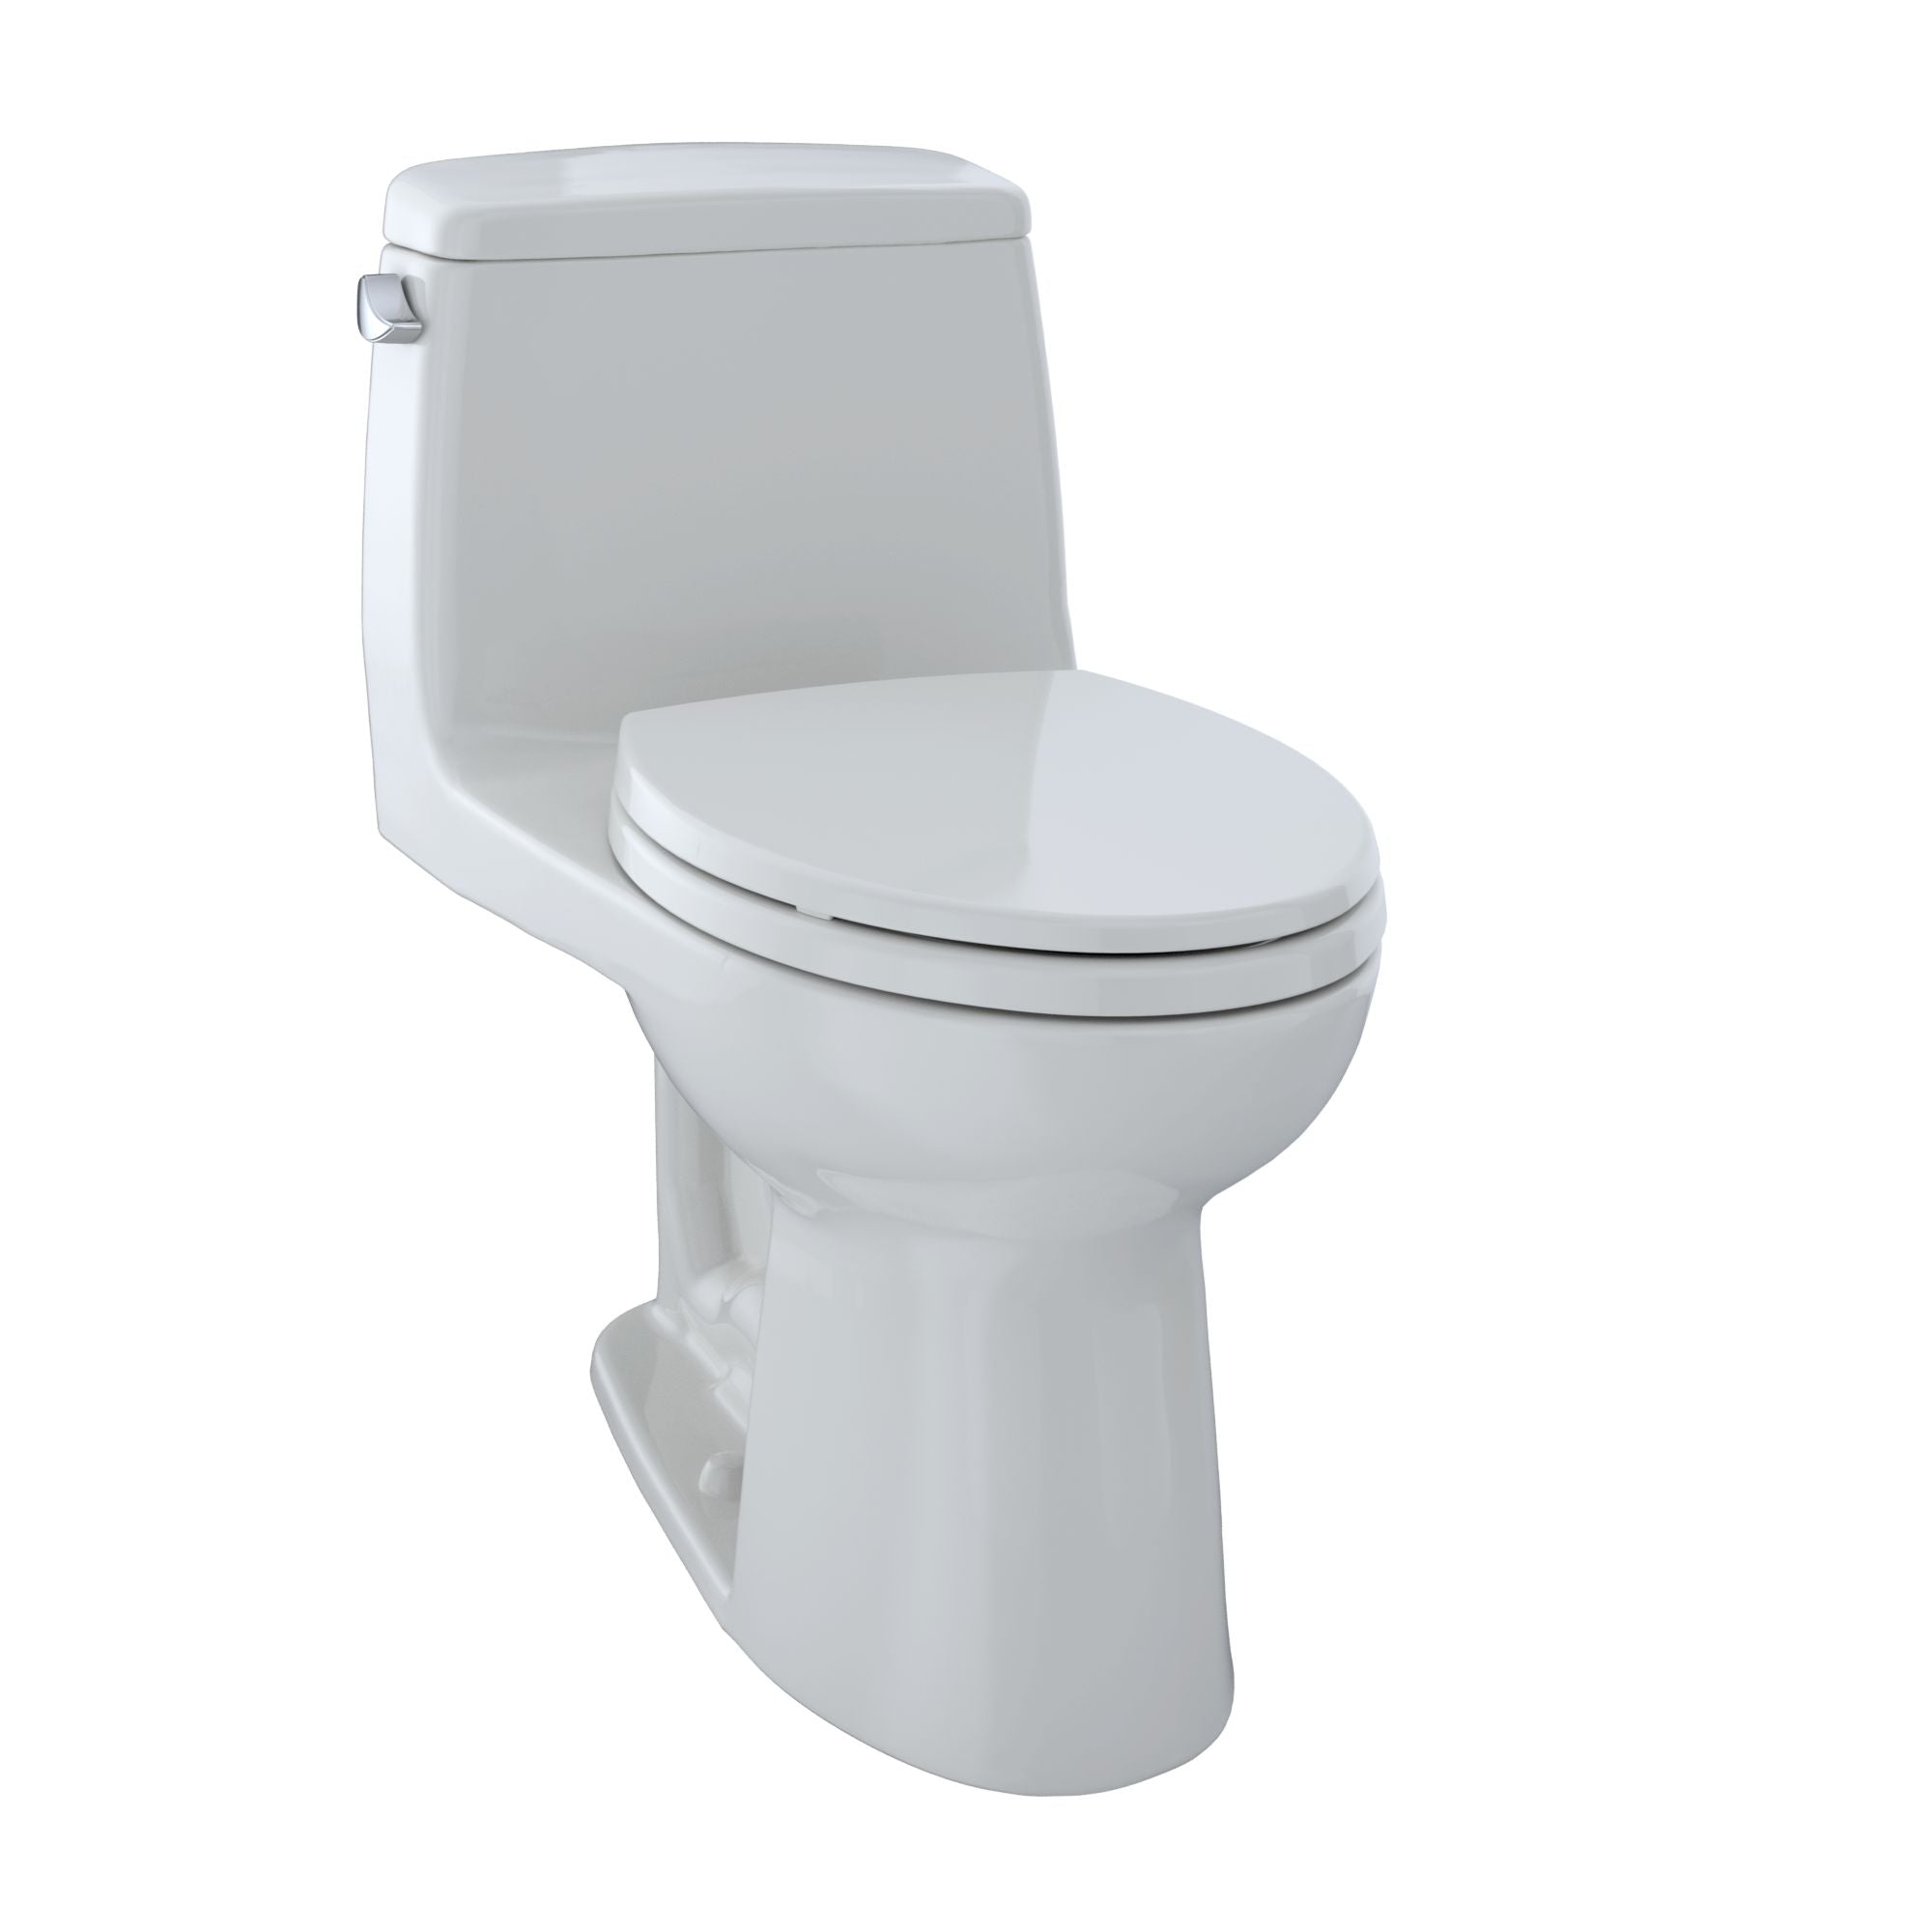 Toto Eco Ultramax One-piece Toilet 1.28 GPF Elongated Bowl